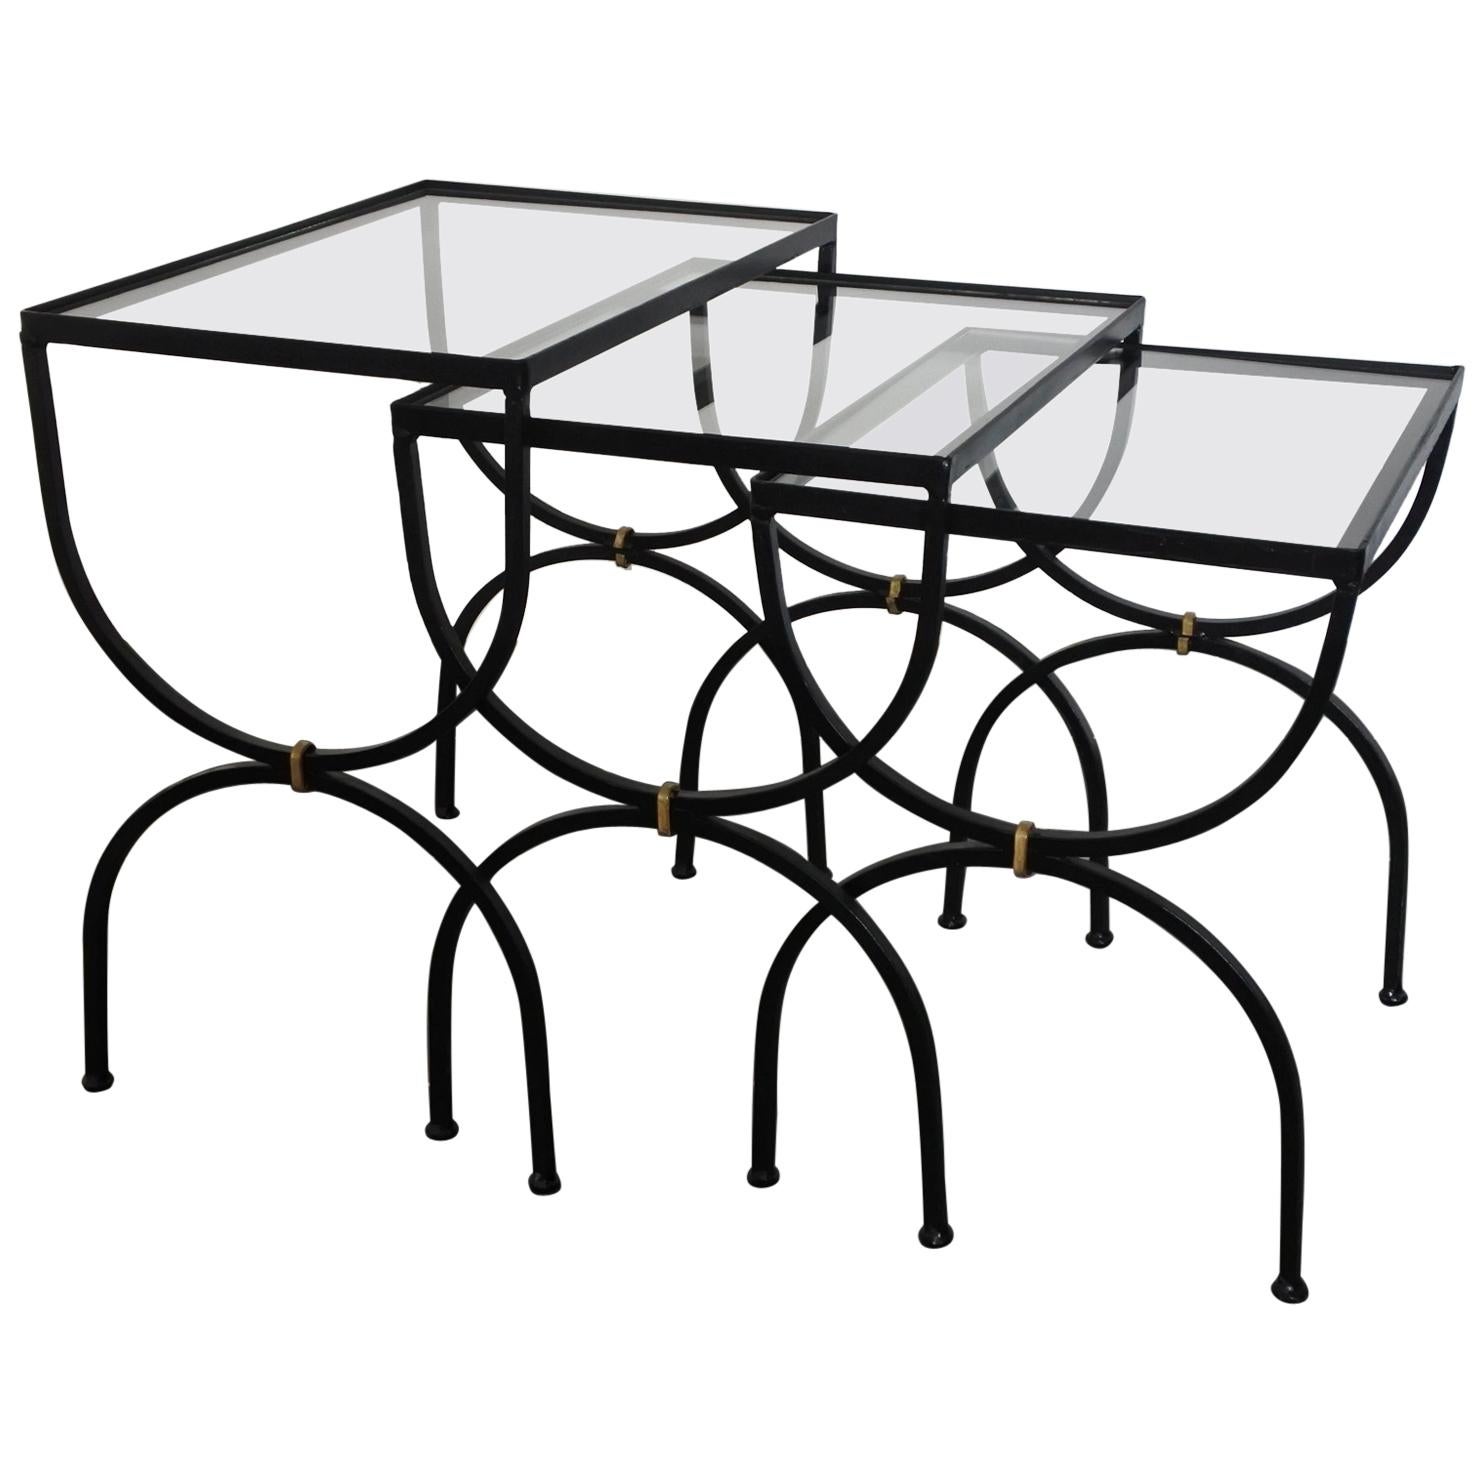 Set of Neoclassical Iron and Glass Nesting Tables, France, 1950s